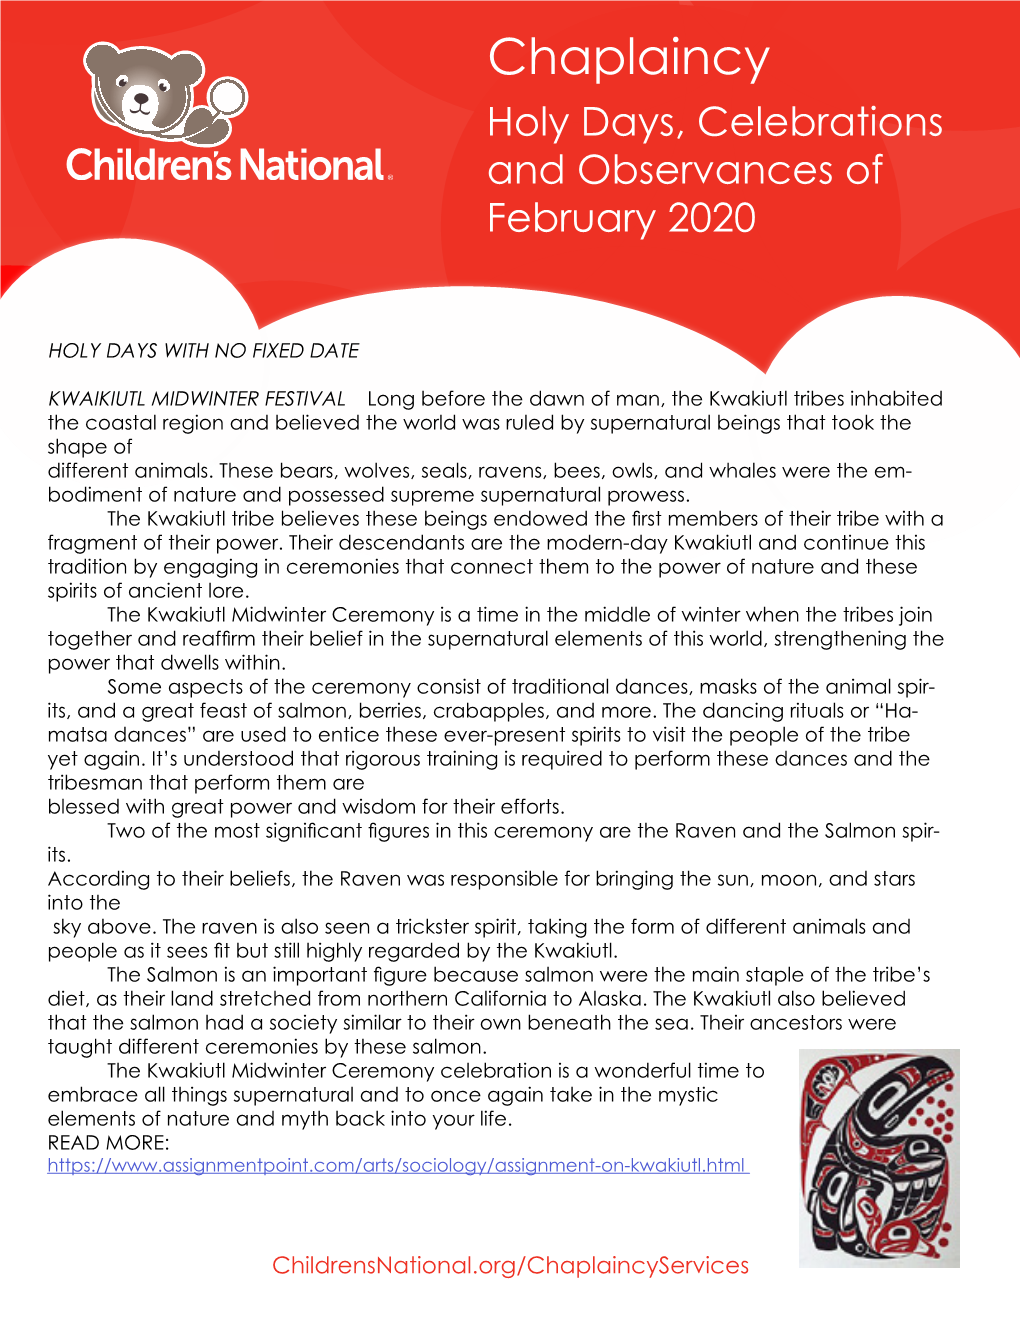 Chaplaincy Holy Days, Celebrations and Observances of February 2020